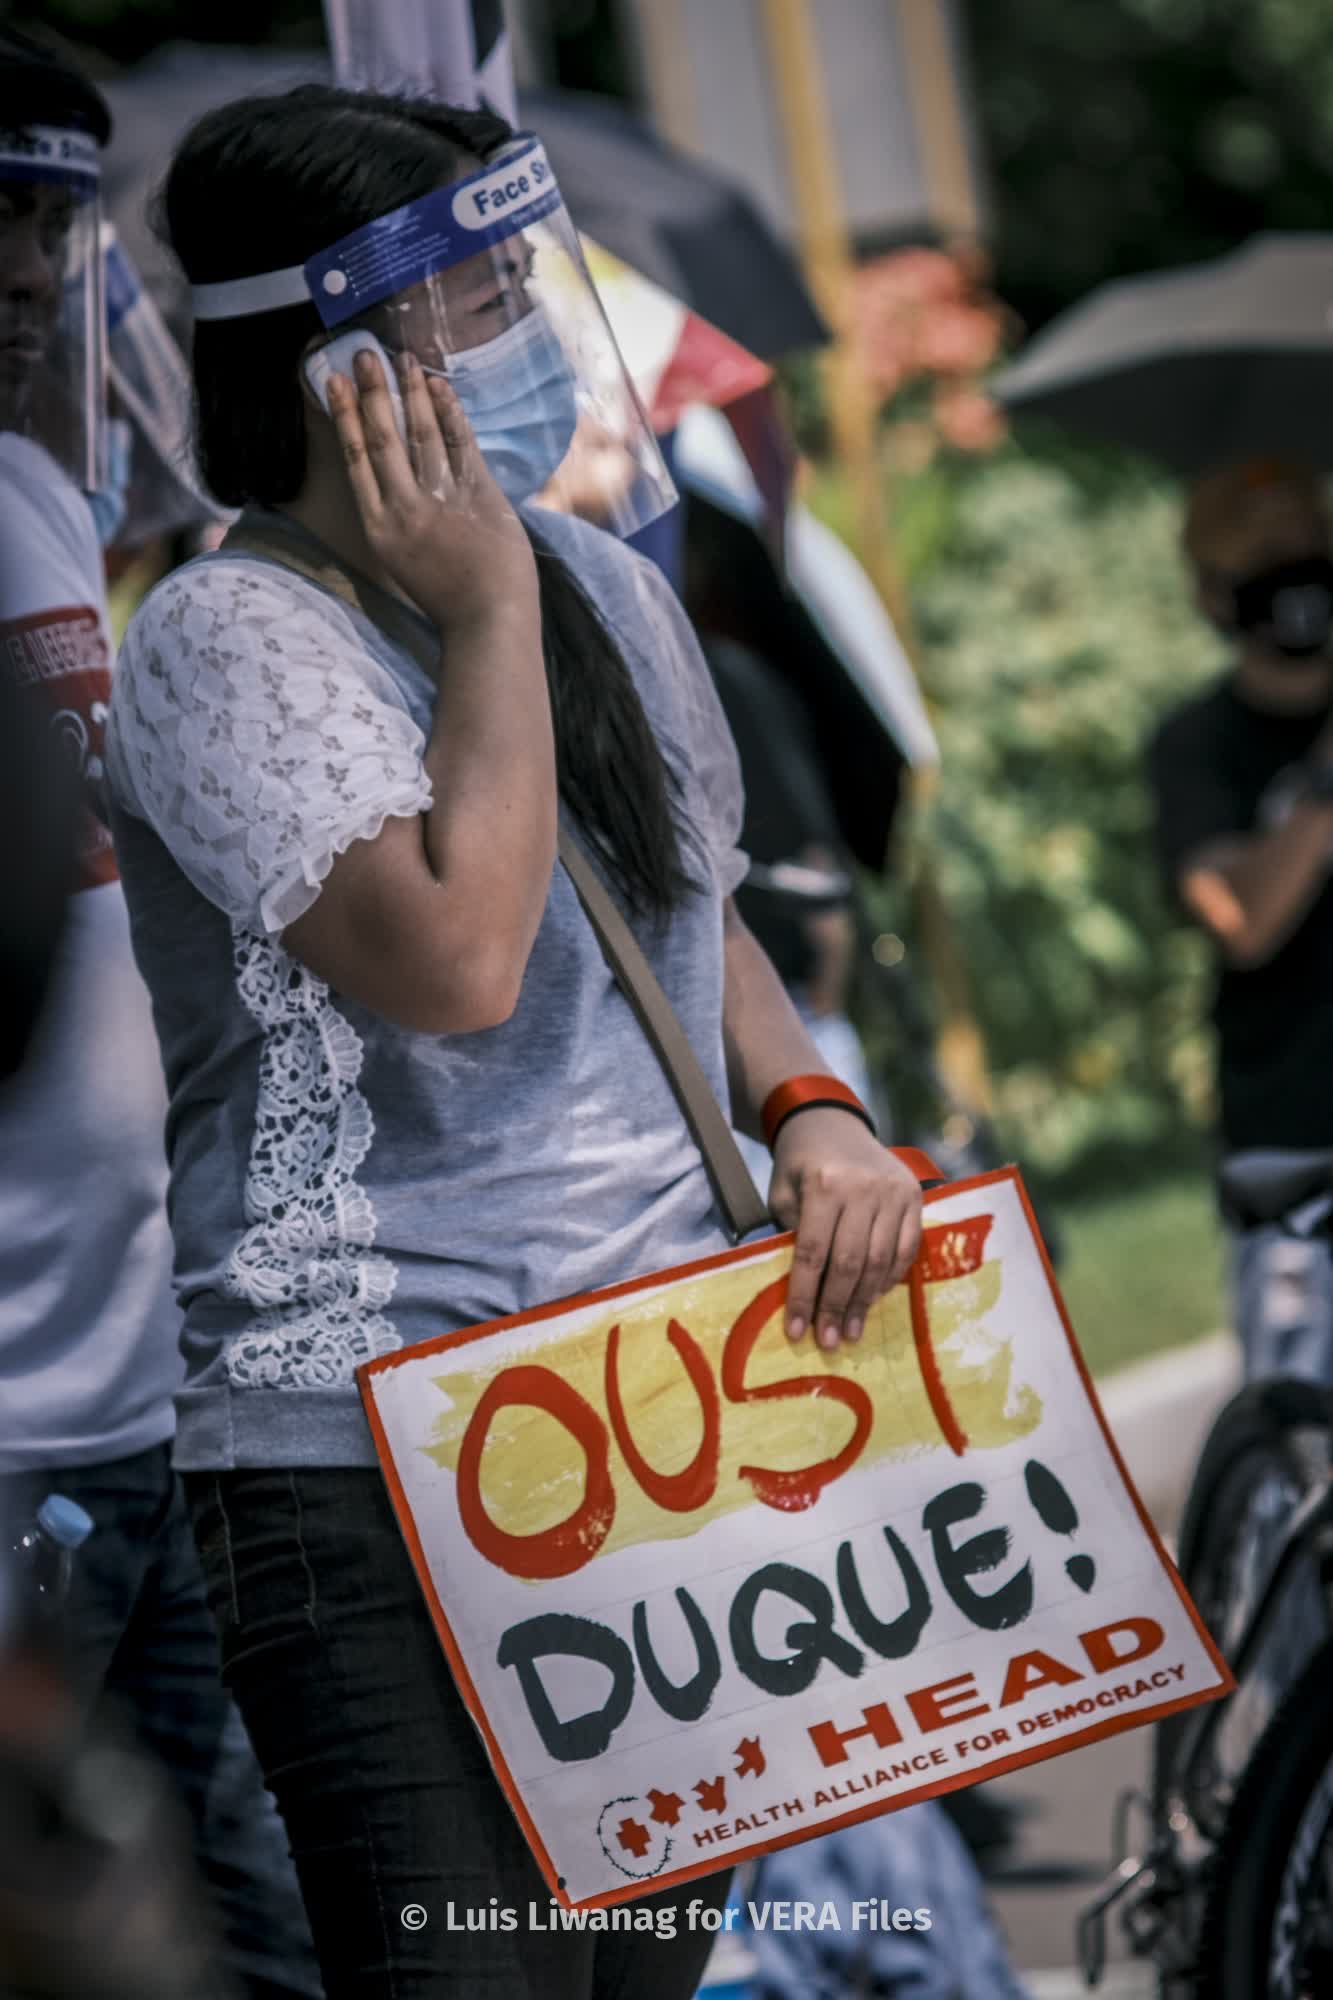 Despite ban, voices of dissent ring loud and clear SONA 2020 6/19  Photos by Luis Liwanag